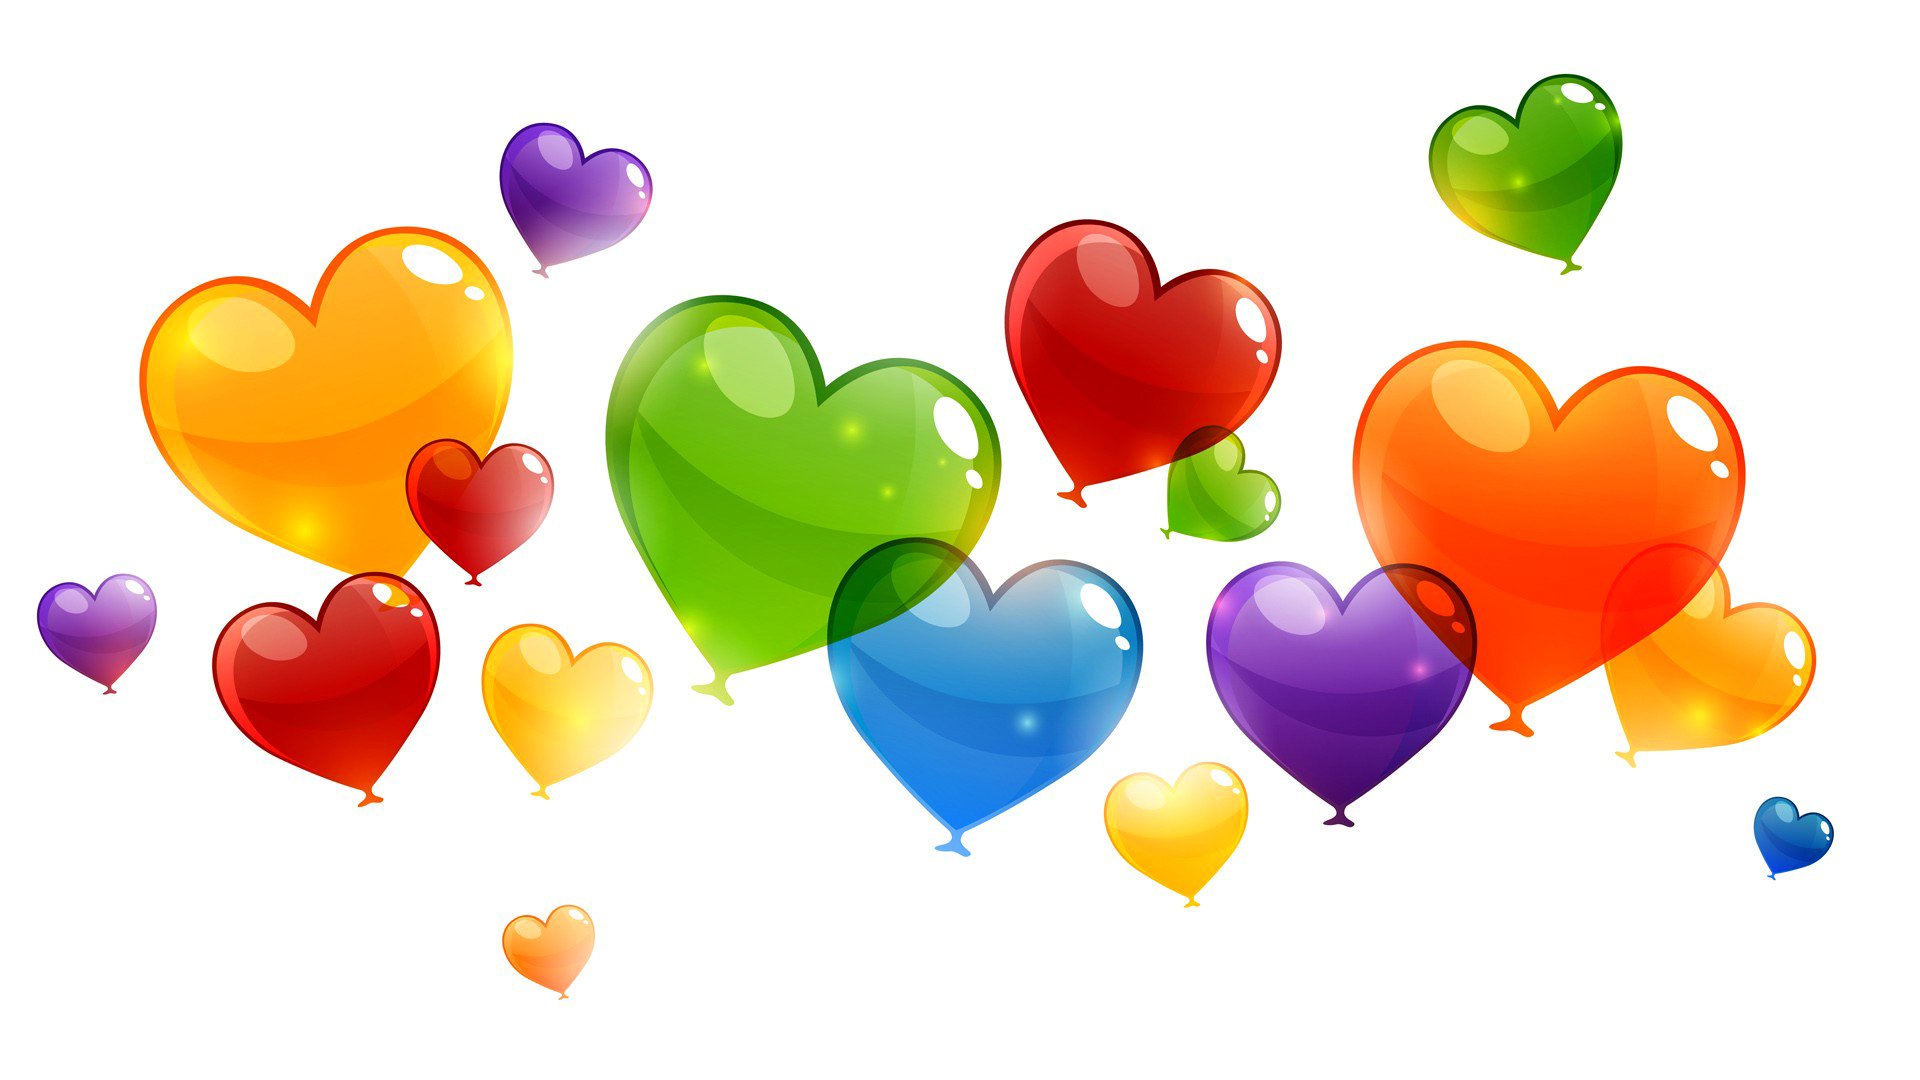 art, Balloons, Birthday, Blue, Colored, Colorful, Green, Hearts, Orange, Purple, Red, Texture, Vector Wallpaper